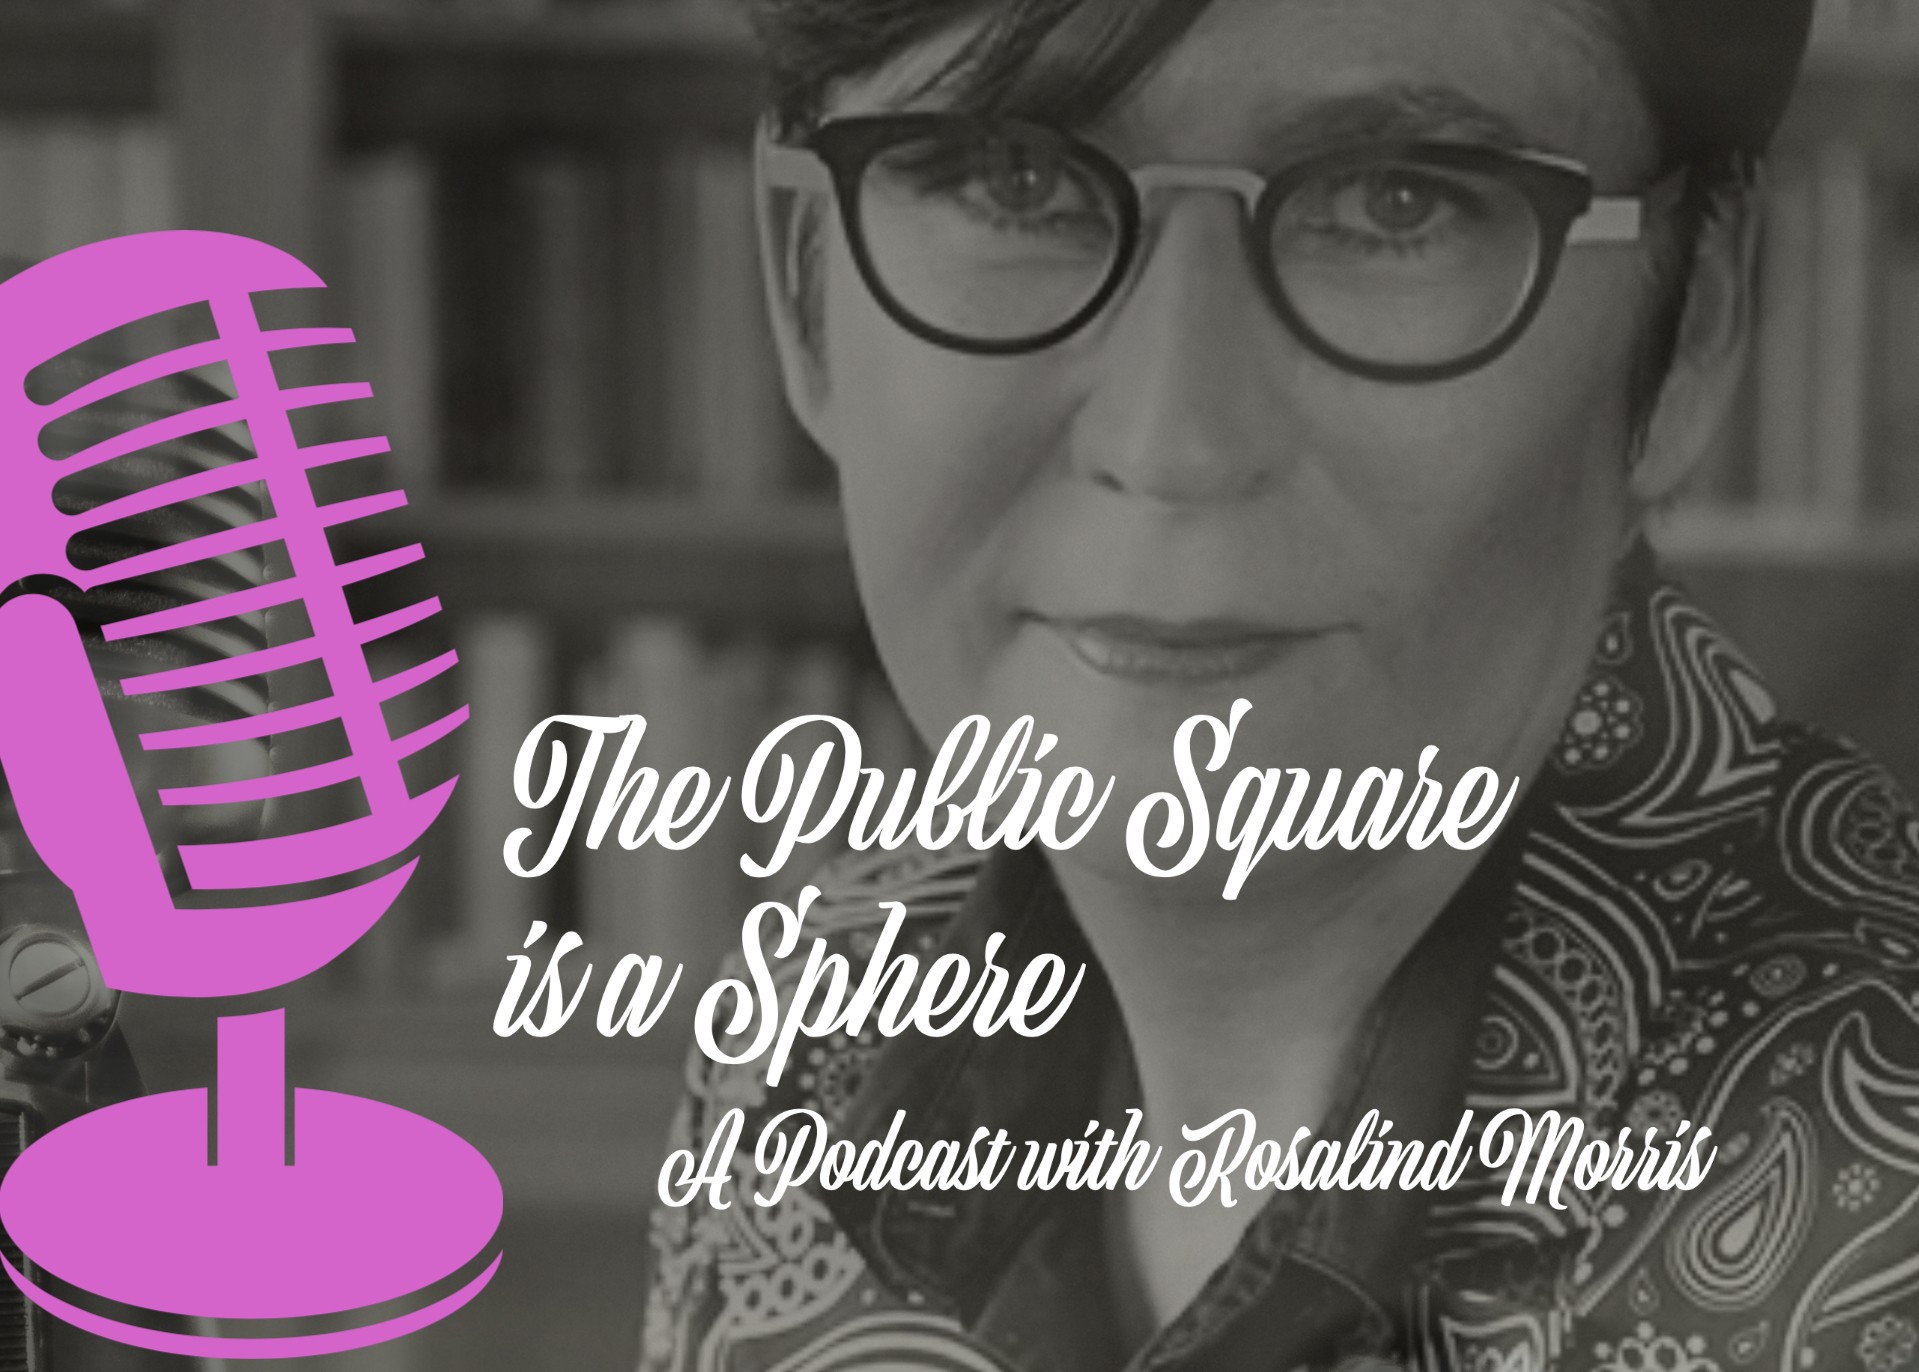 'The Public Square is a Sphere,' logo with Morris headshot in background